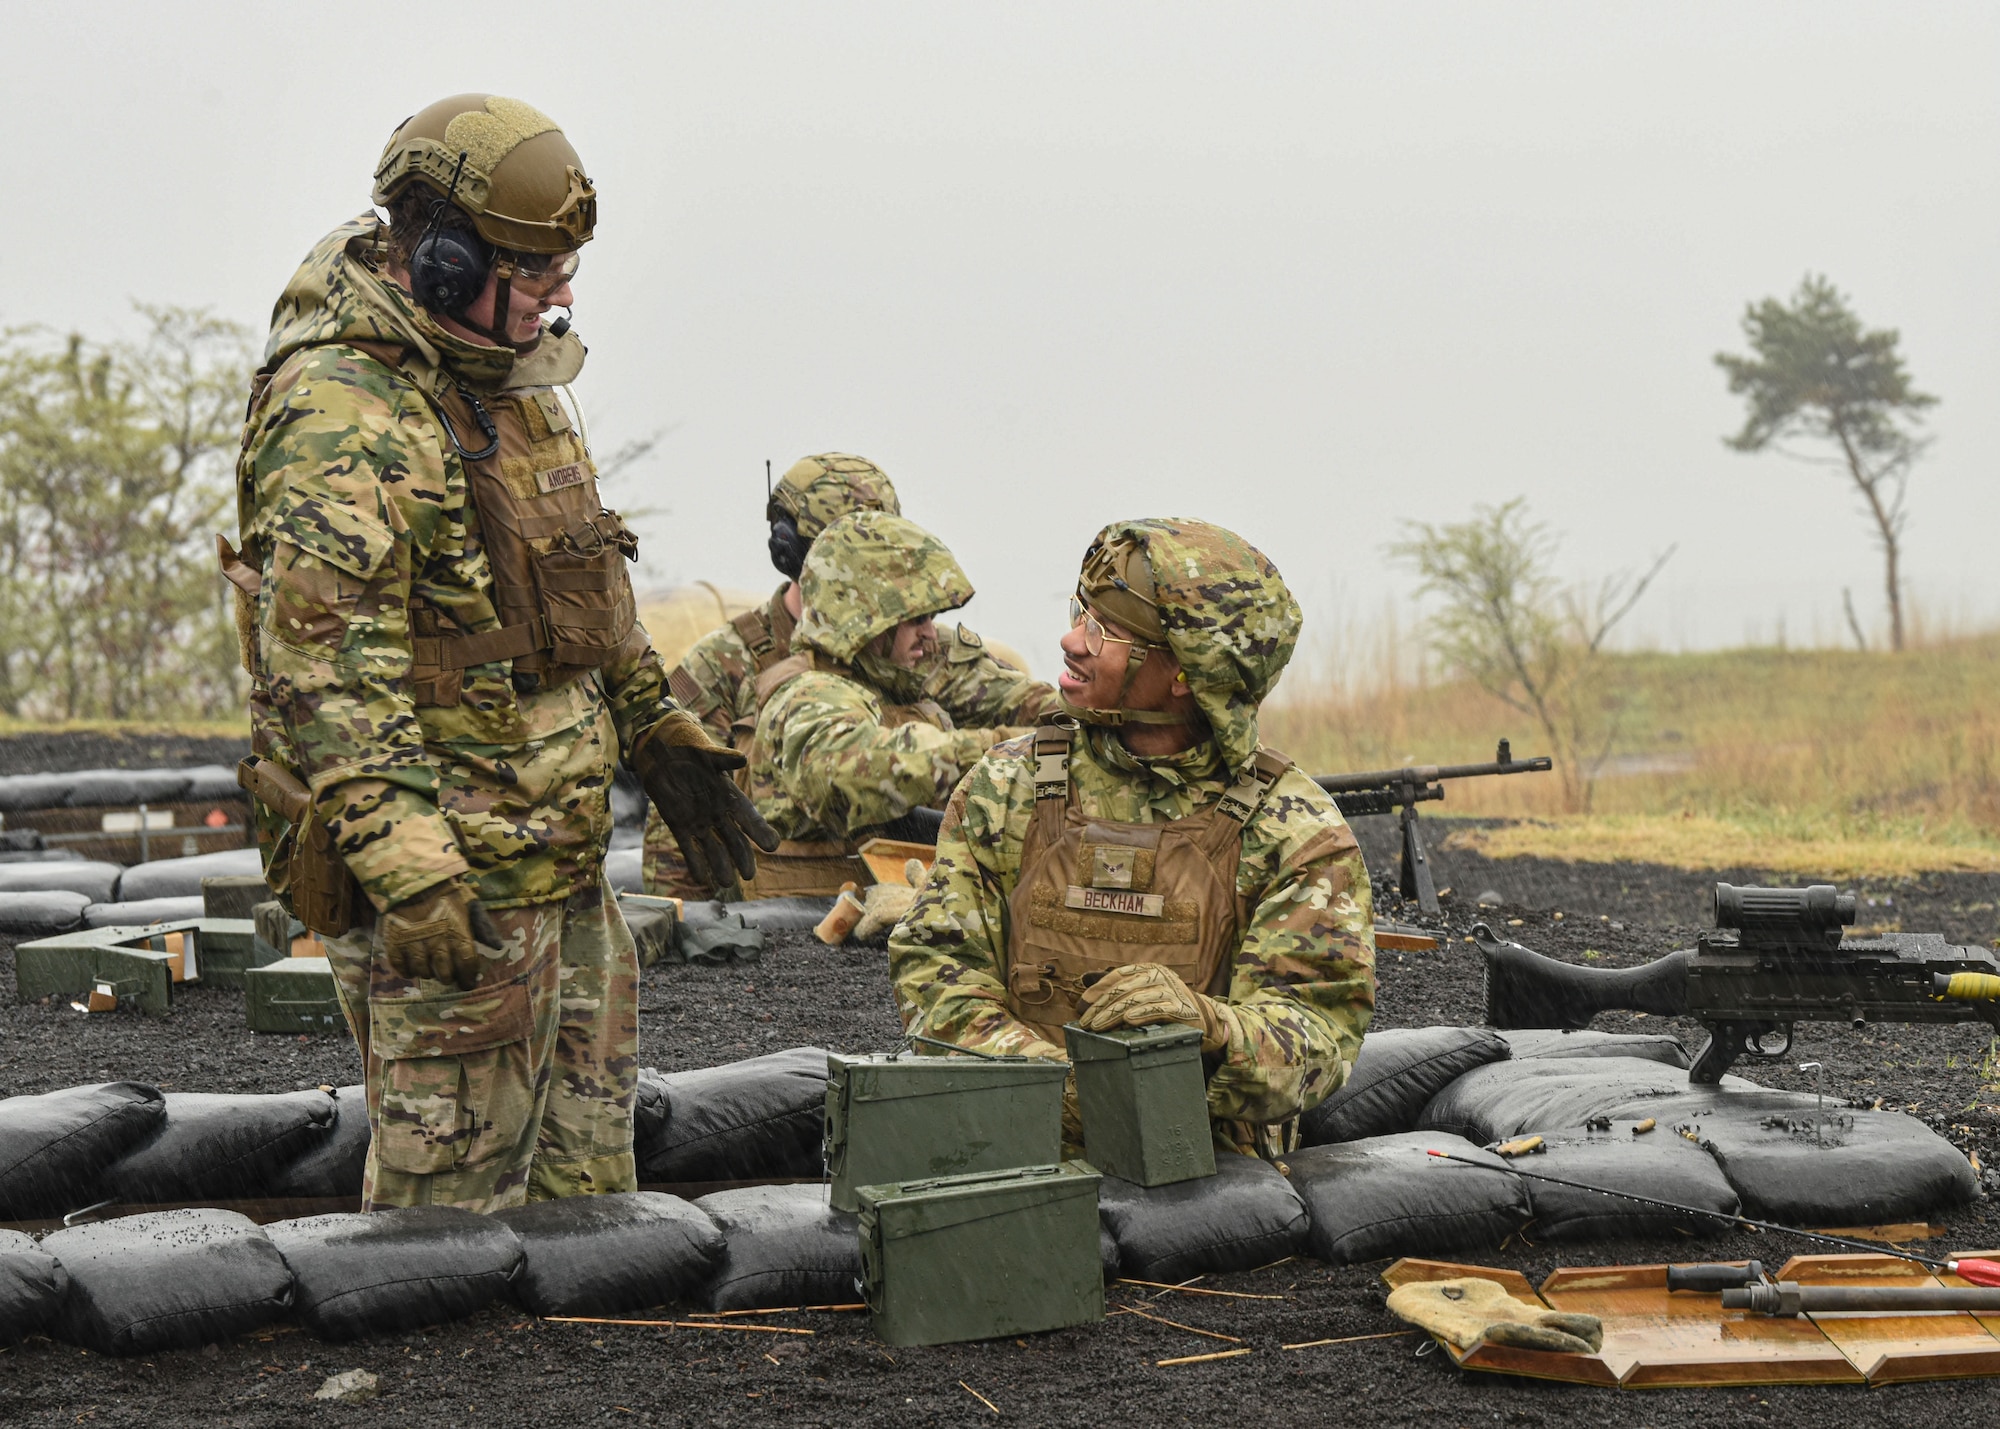 Two U.S. servicemembers speak while other members prepare to fire a machine gun in the background.